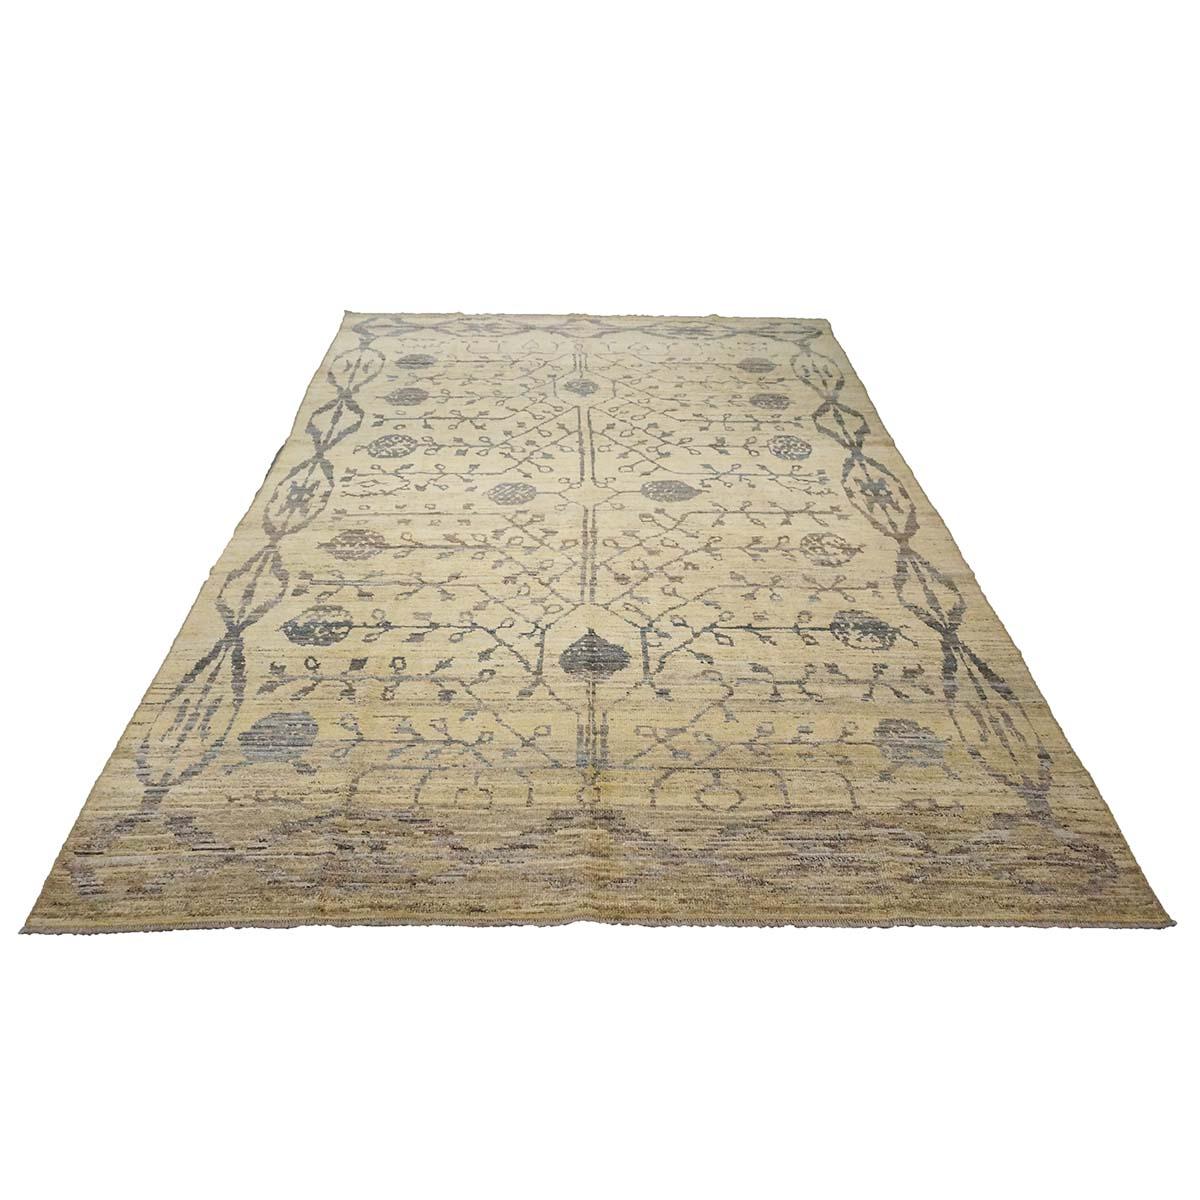   Ashly Fine Rugs presents a 21st-century Turkish Oushak 8x12 Handmade Area Rug. Oushak weavings began in a location just south of Istanbul, in a region that was to become the rugs namesake, Oushak. Although nomads first produced the rugs for